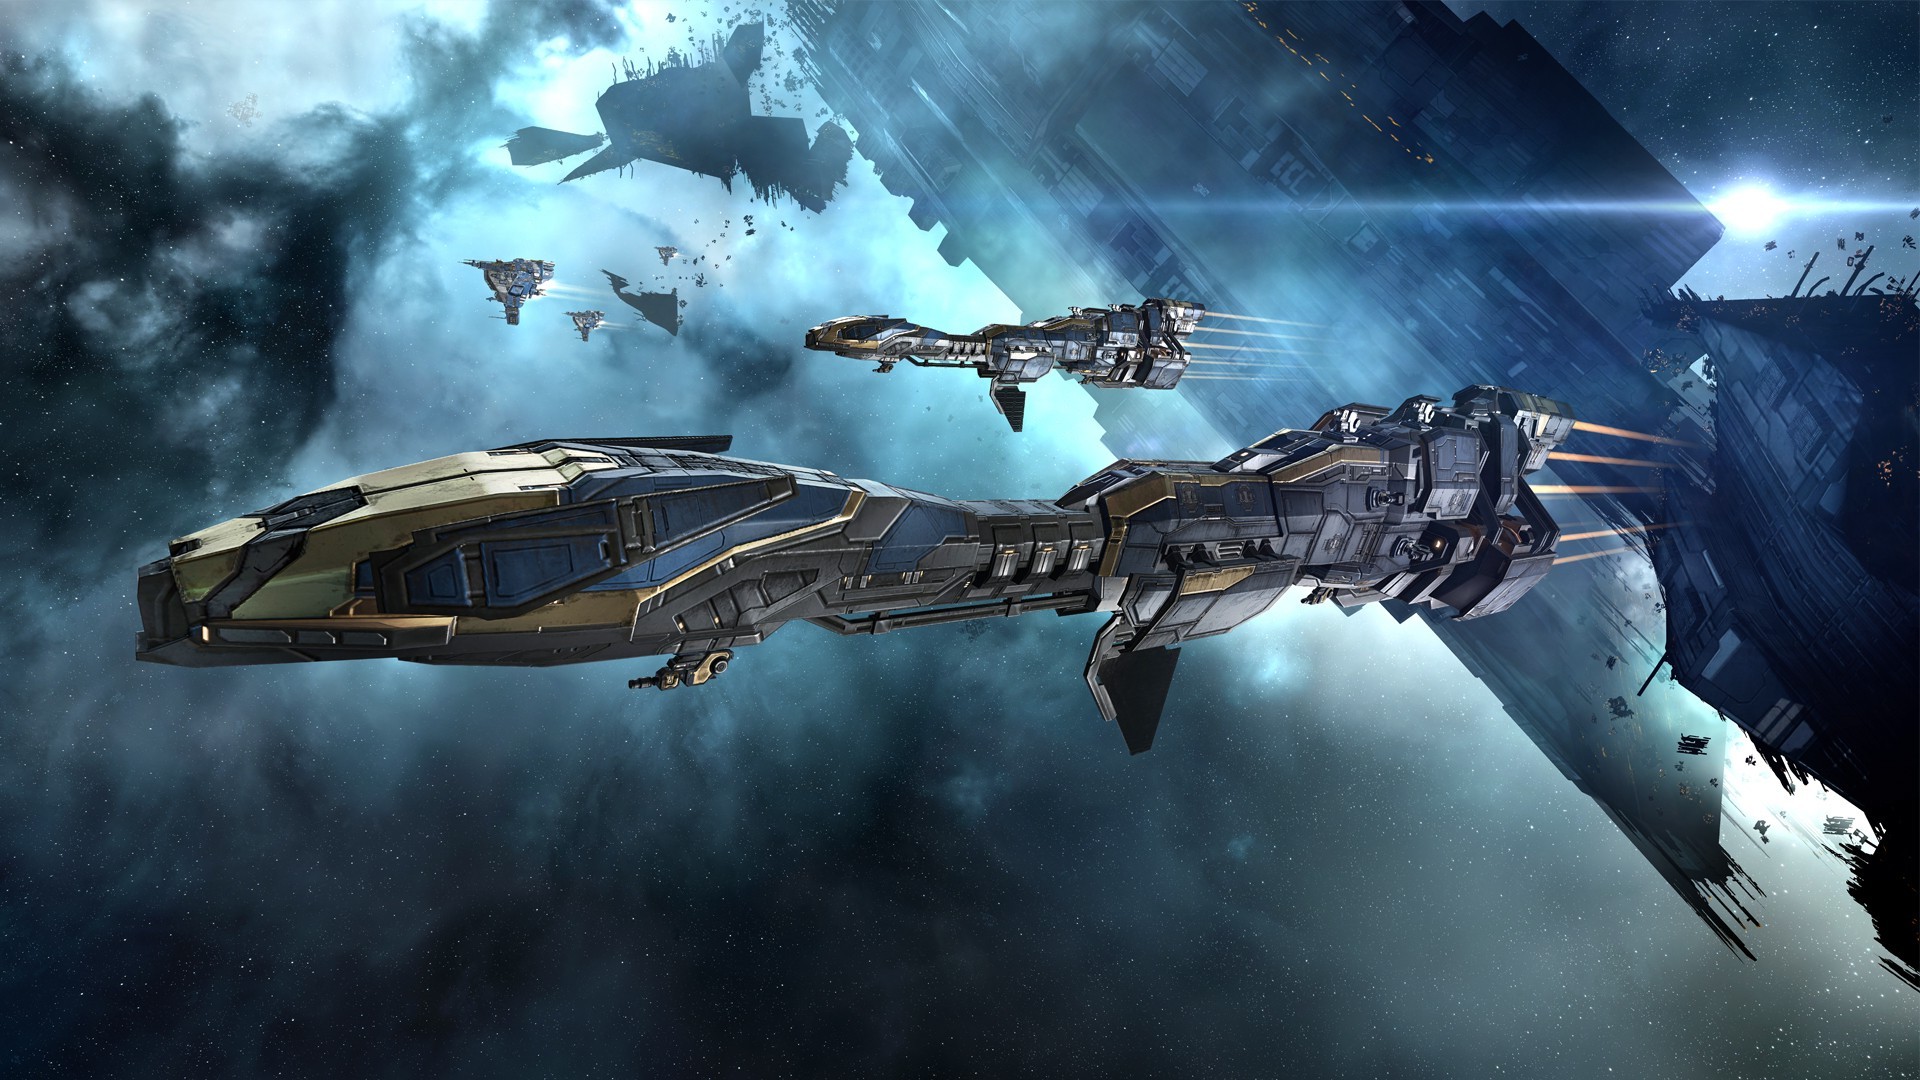 EVE Online, Minmatar, Video Games, Spaceship, Concept Art, Science Fiction, Space, Stabber Cruiser Wallpaper